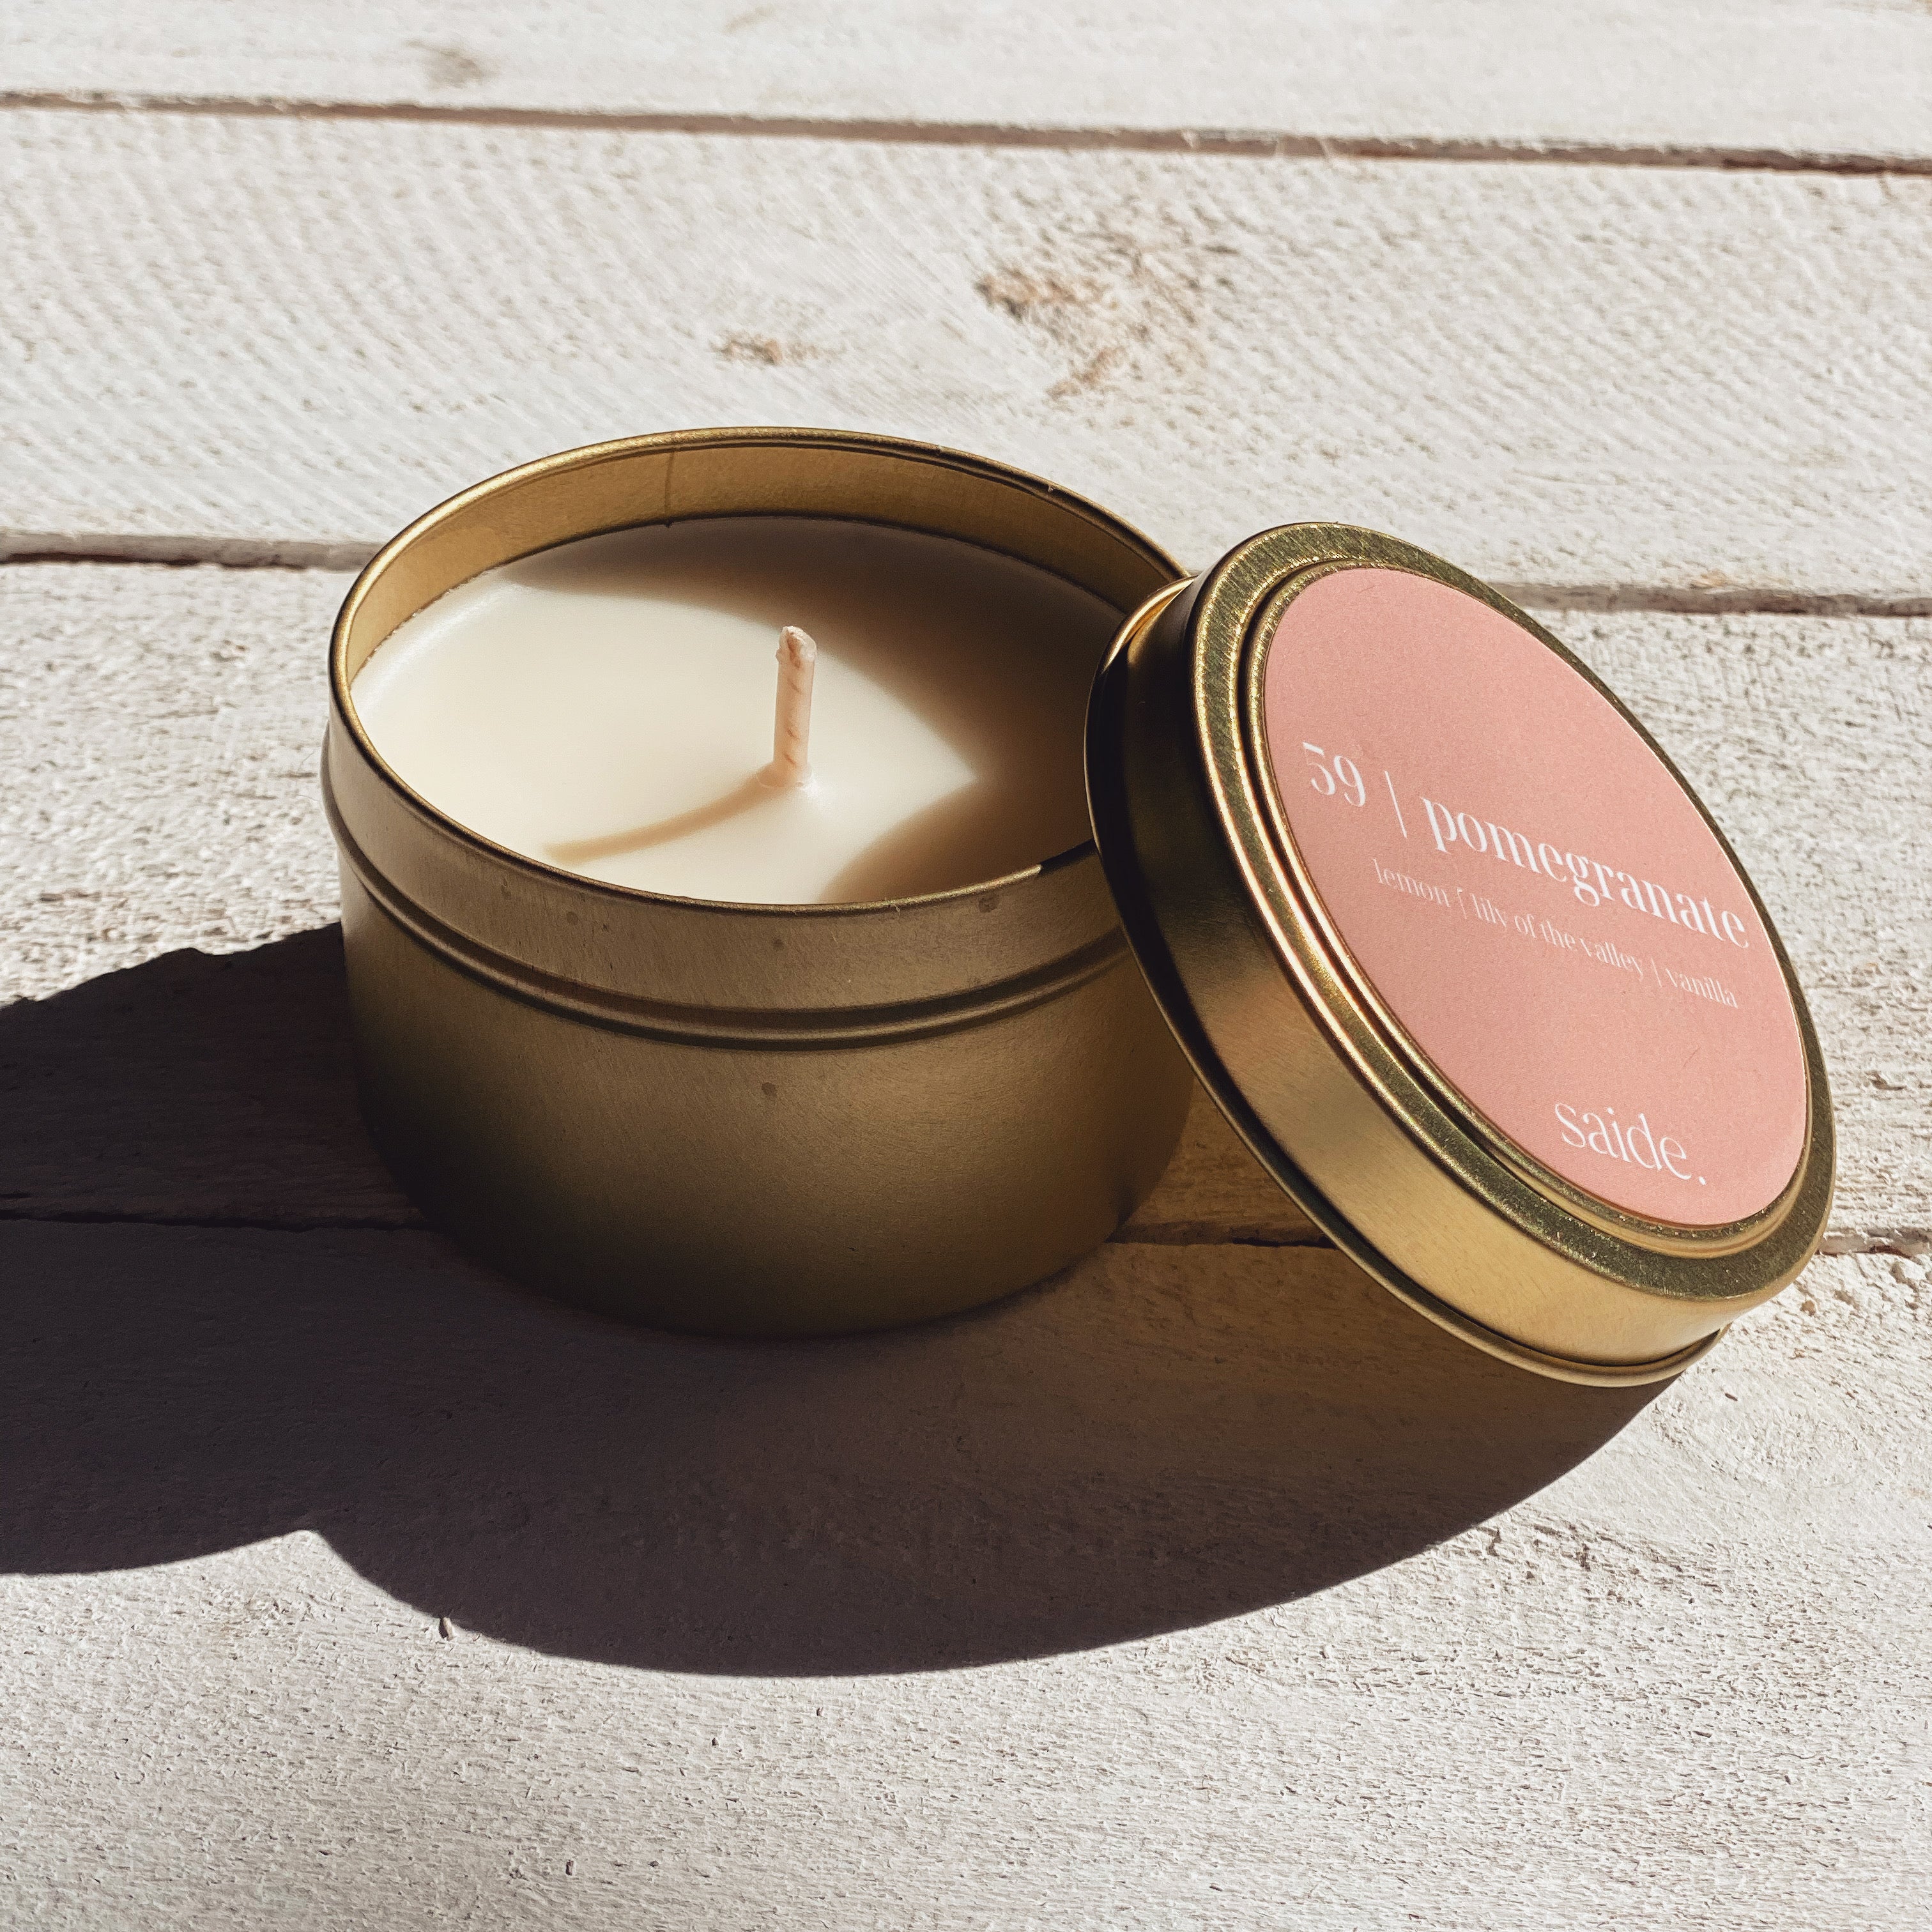 #59 pomegranate soy candle